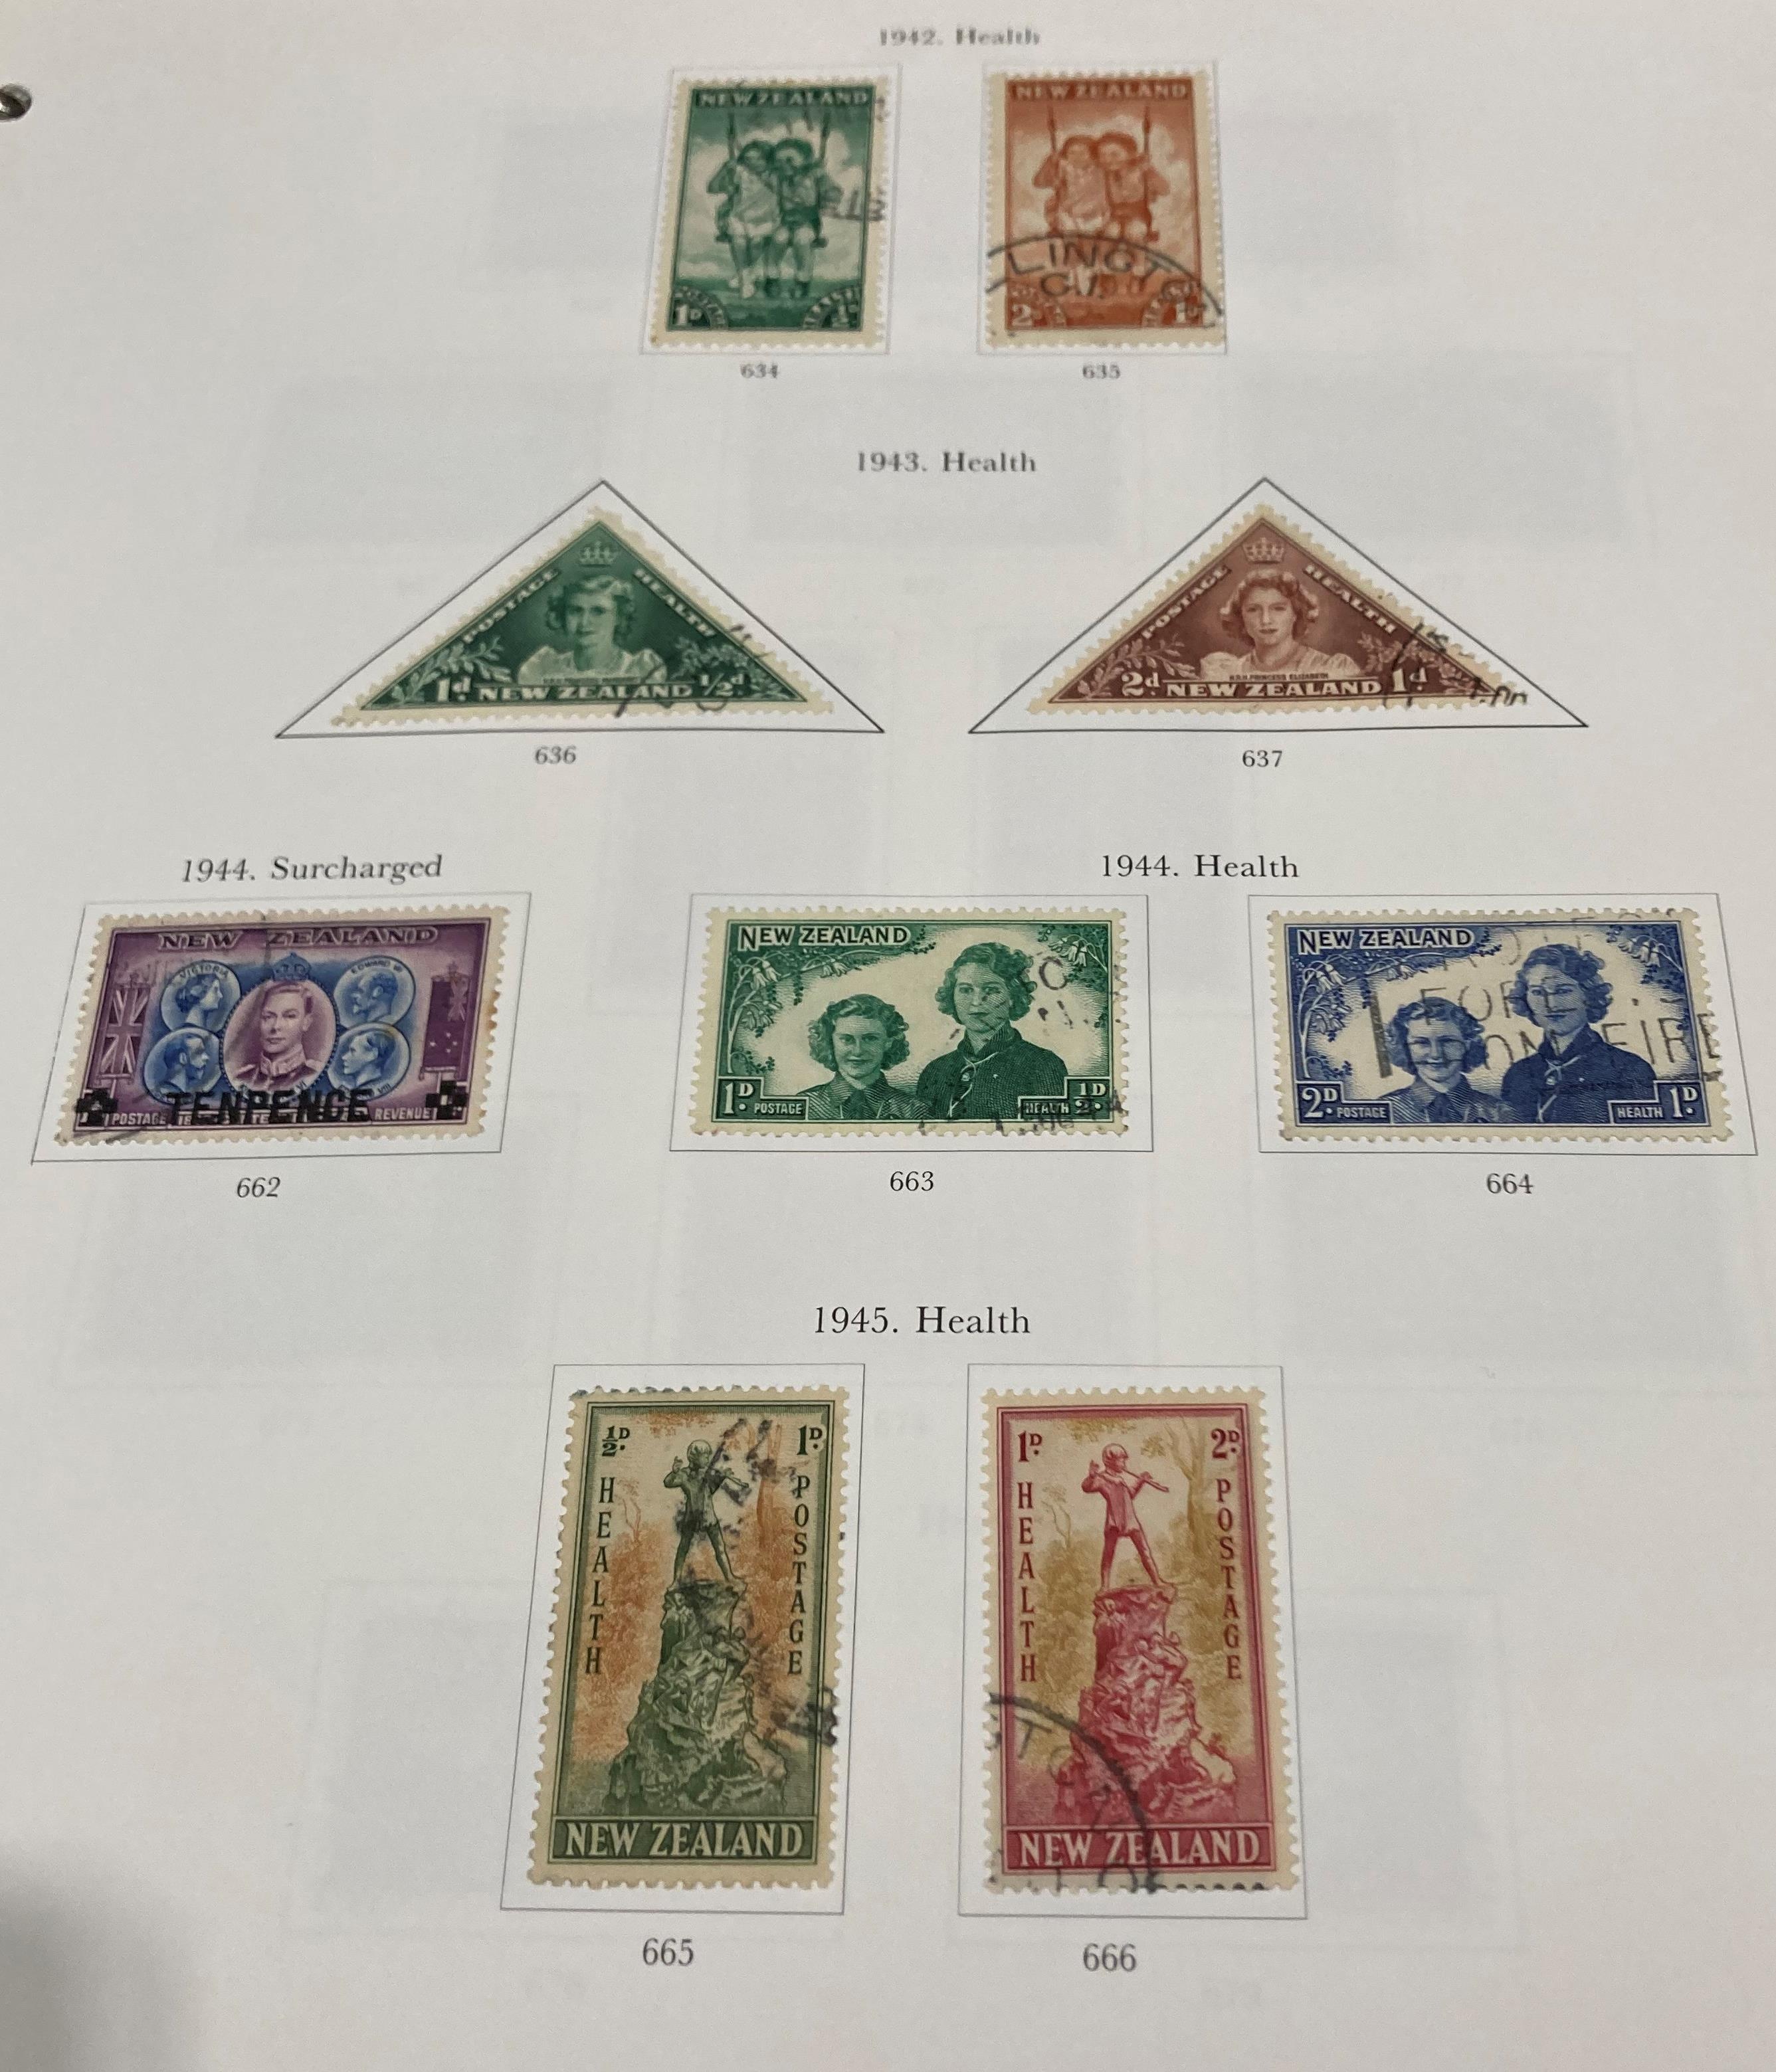 Six Stanley Gibbons and one other album containing stamps of New Zealand (saleroom location: S2 - Image 6 of 16